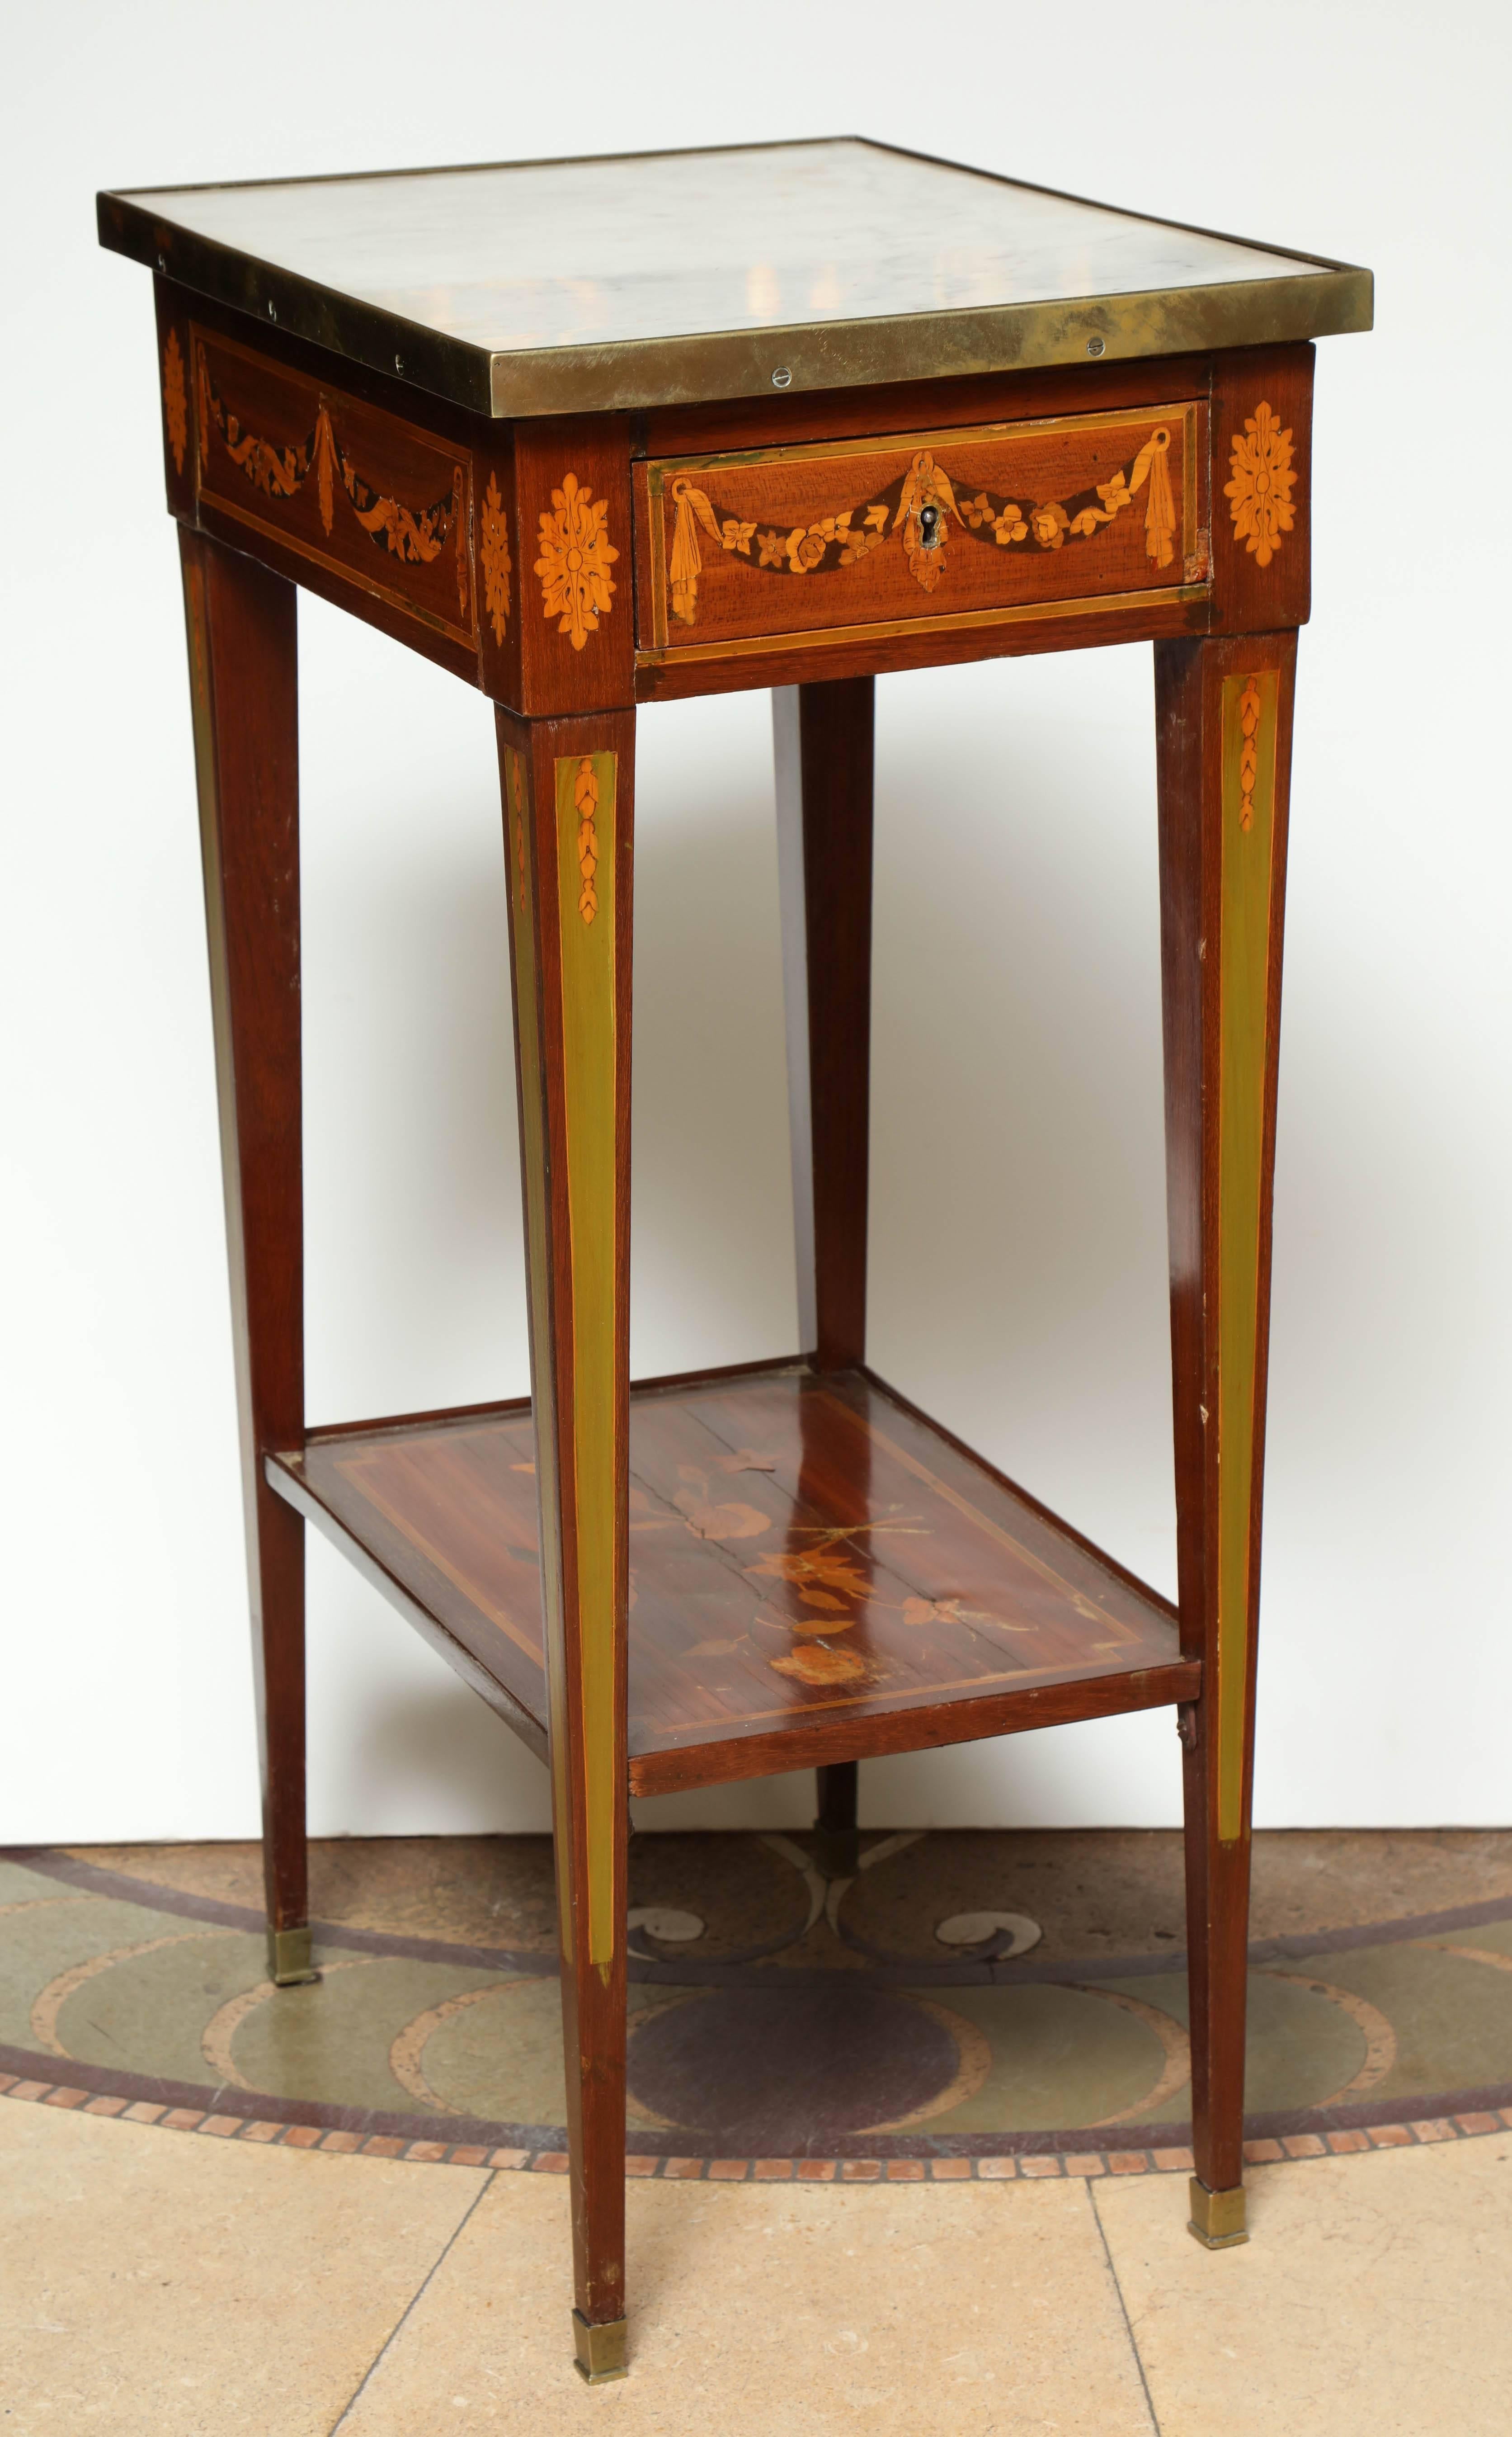 A fine Louis XVI marquetry inlaid side table with marble top, bronze banding, single drawer, shelf stretcher and square tapered legs.